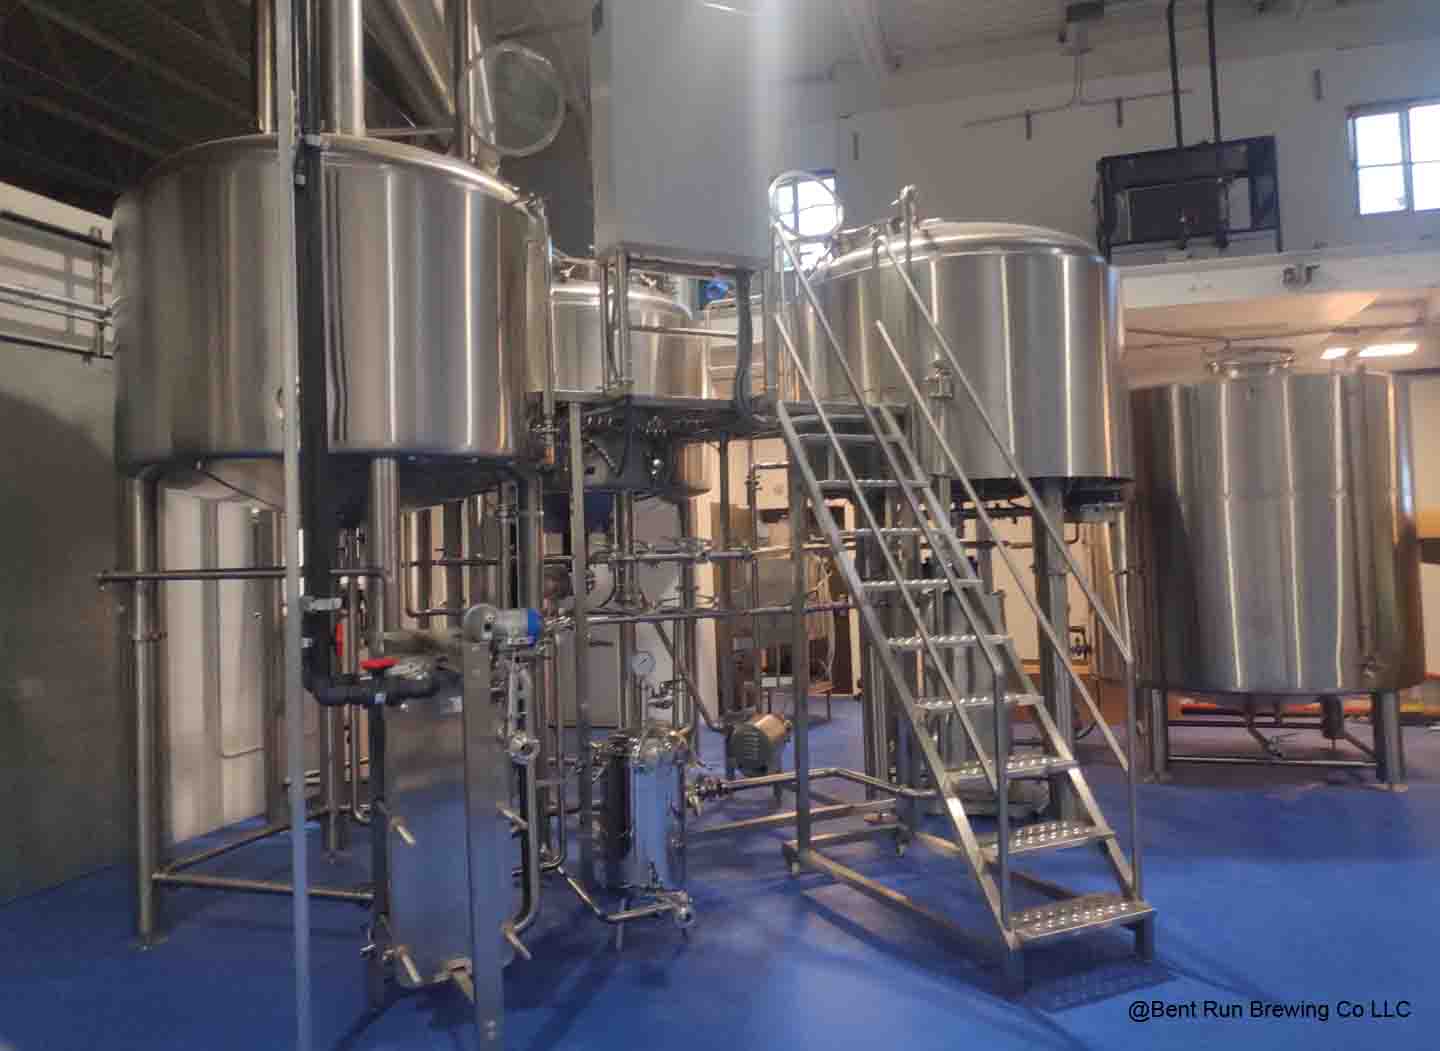 Do I need hopback for my beer brewery equipment?